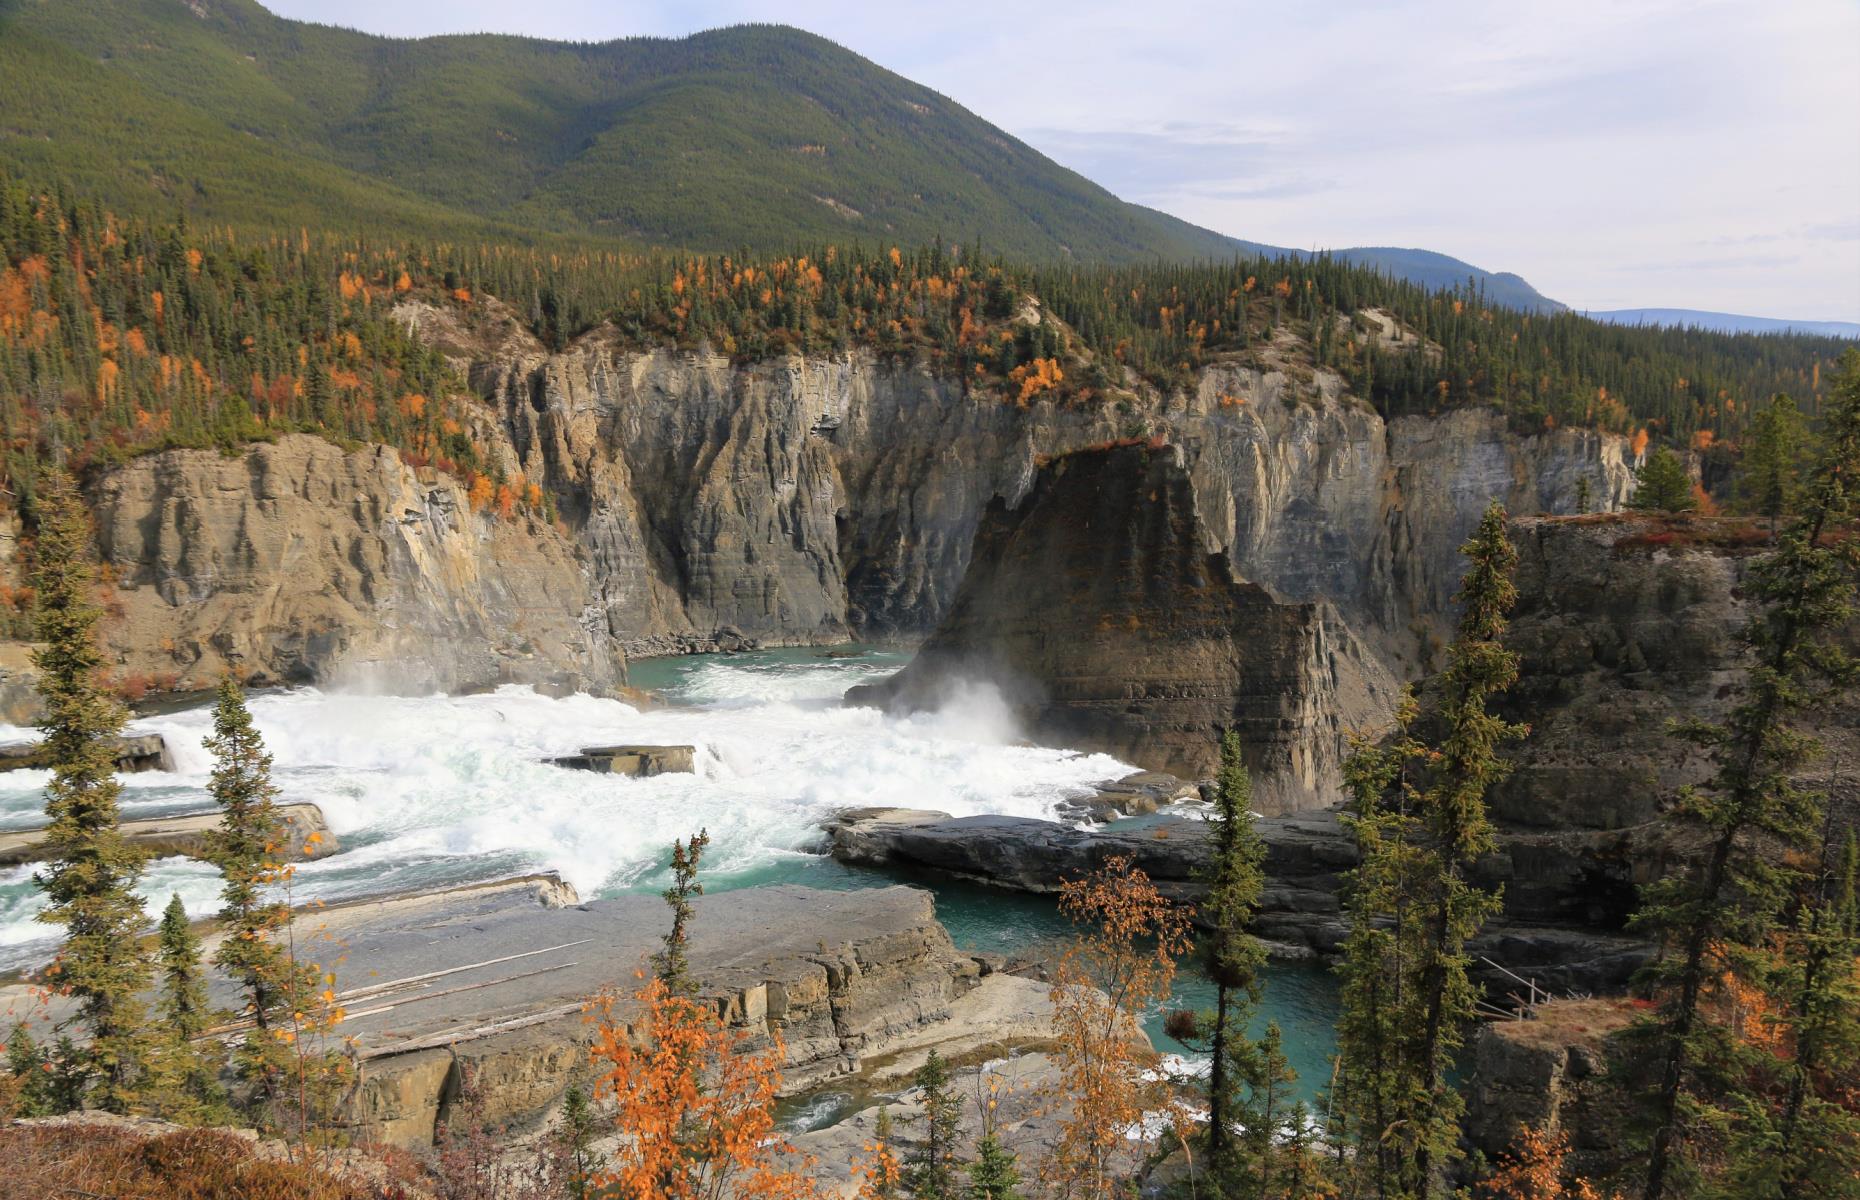 Canada's top natural beauty spots are simply stunning